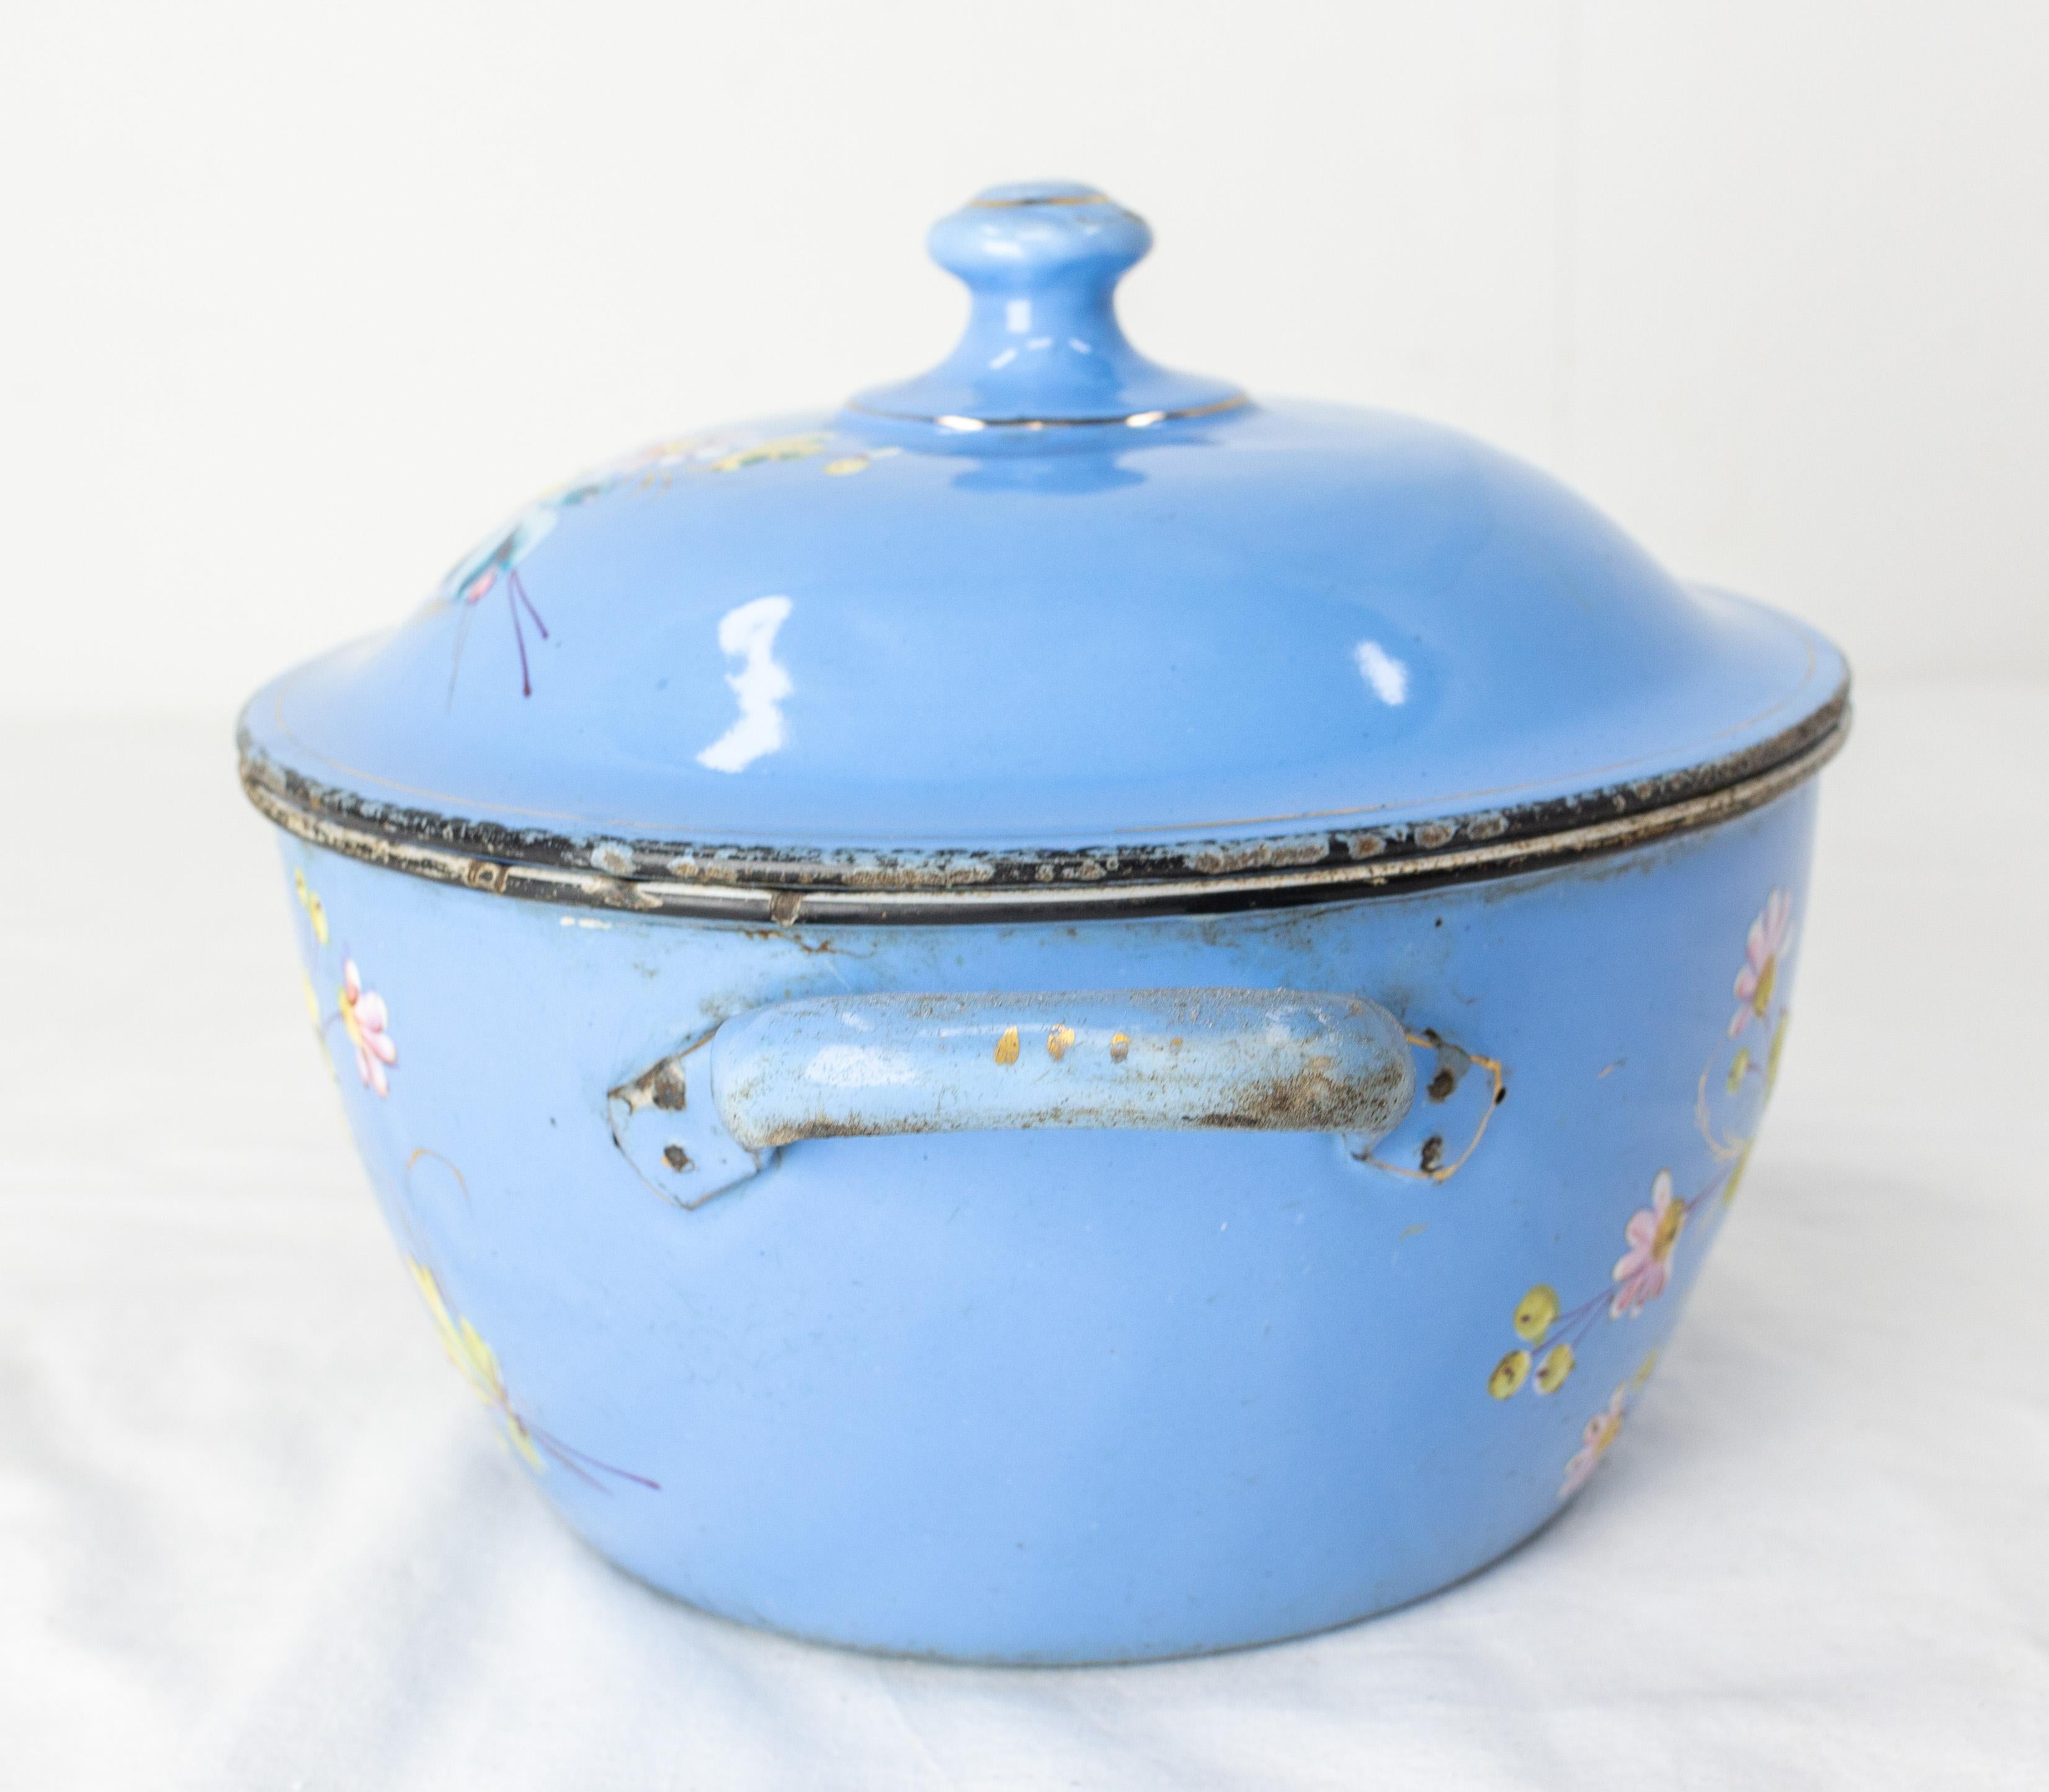 French Country Blue Soup Tureen with Floral Decoration, Enameled Iron, C. 1900 In Good Condition For Sale In Labrit, Landes